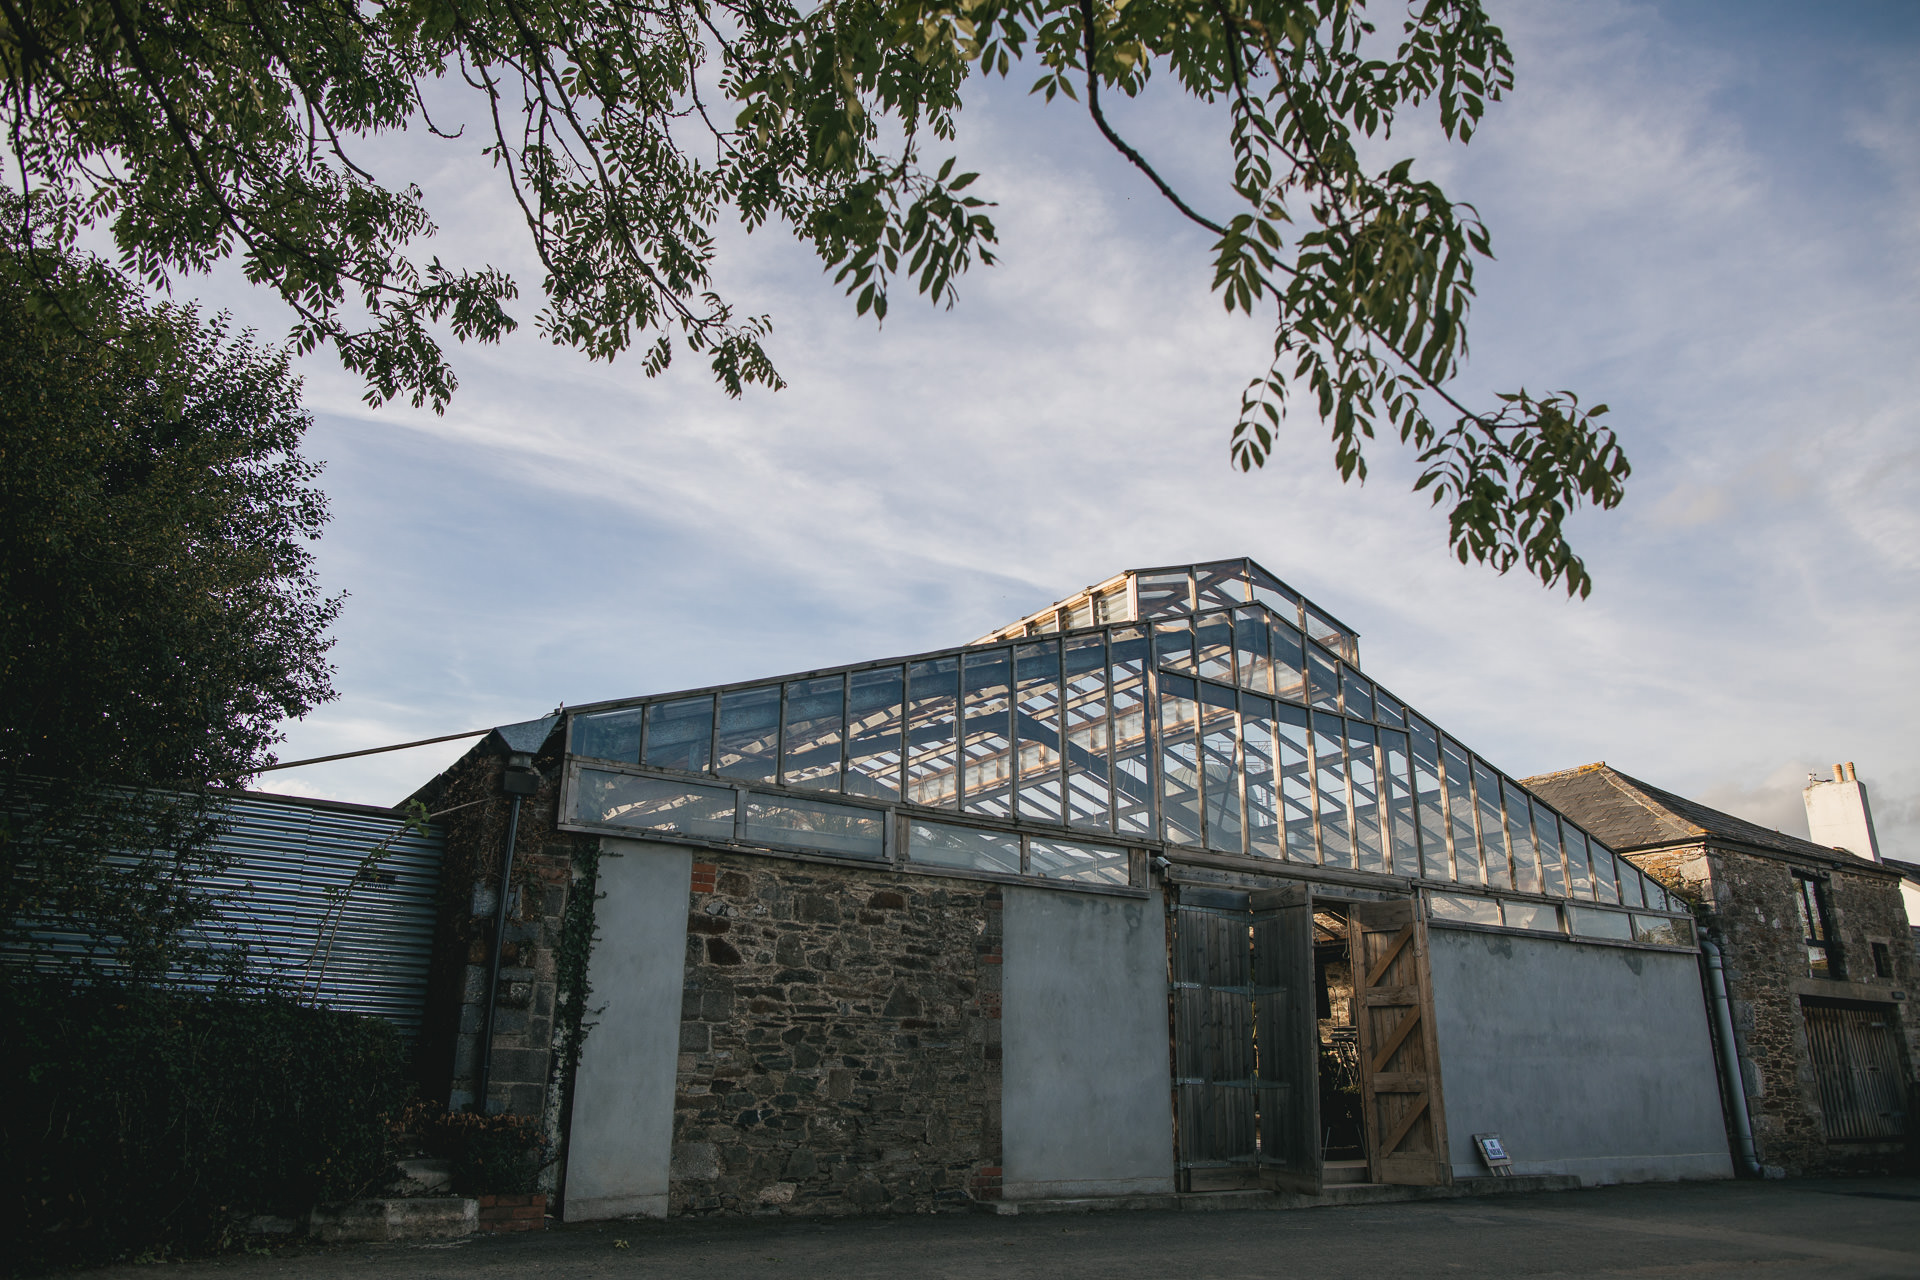 External image of the glasshouse at Anran